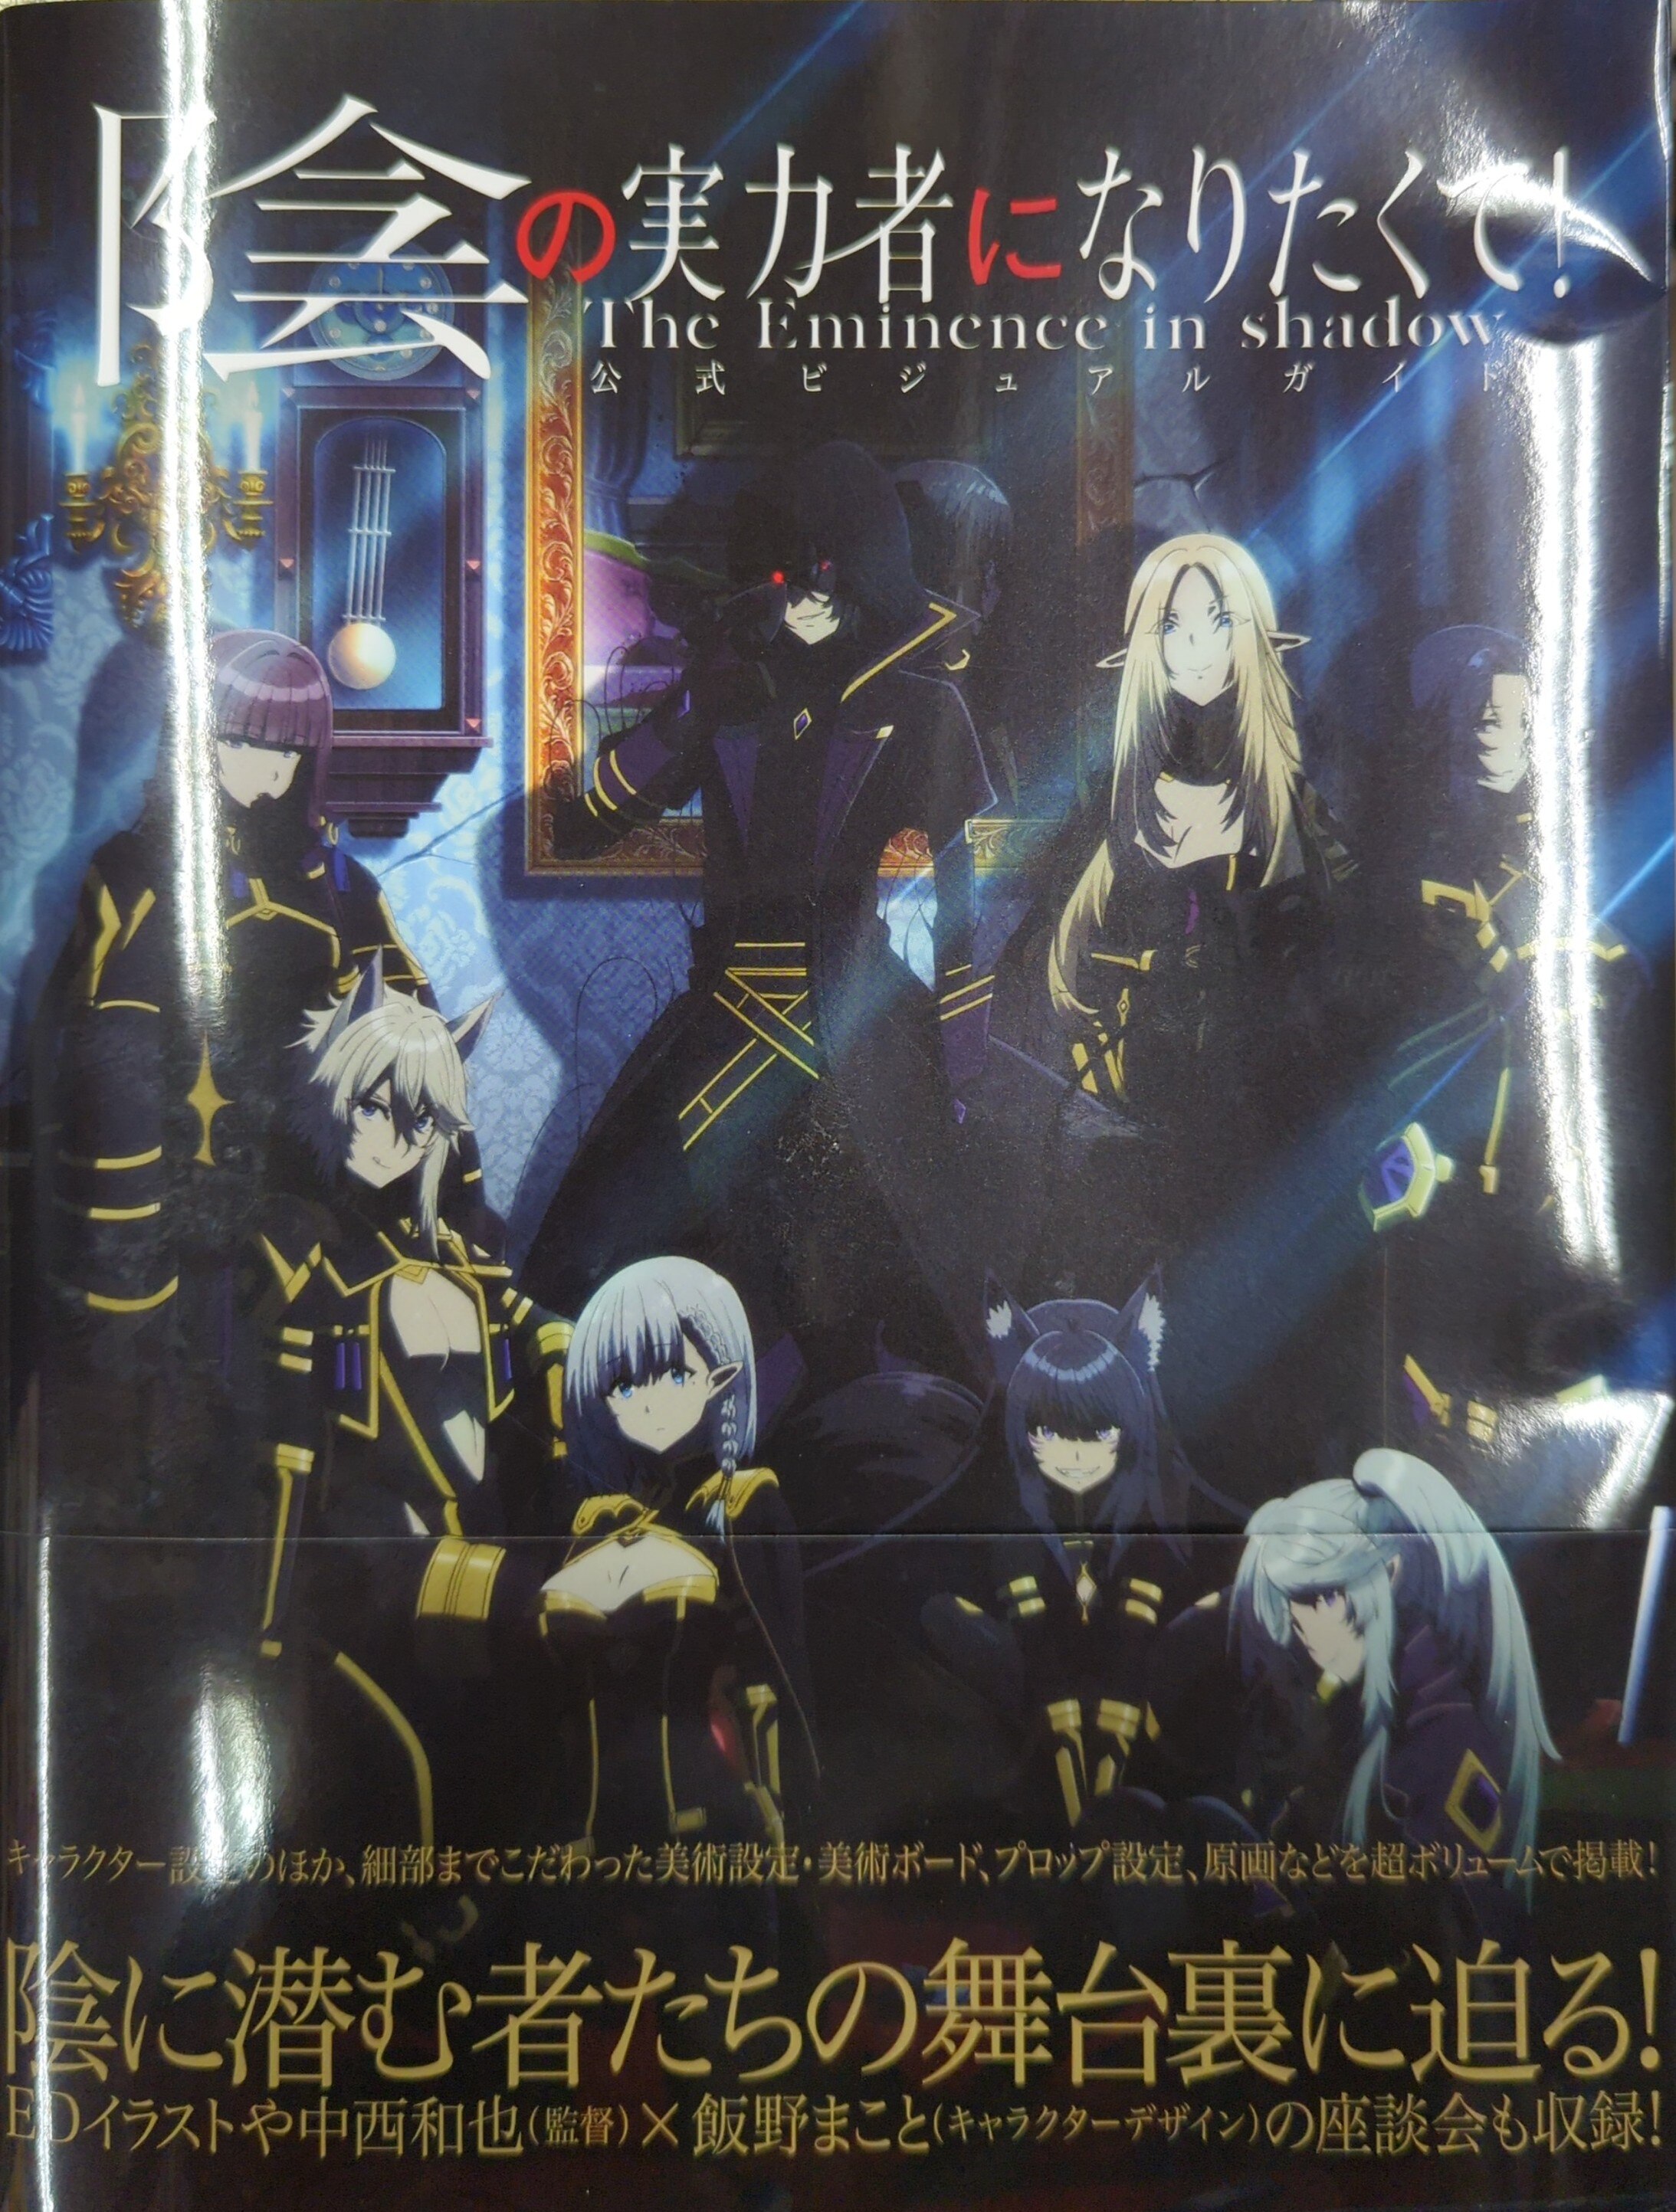 The Eminence in Shadow Official Anime Art Book Visual Guide Design Works